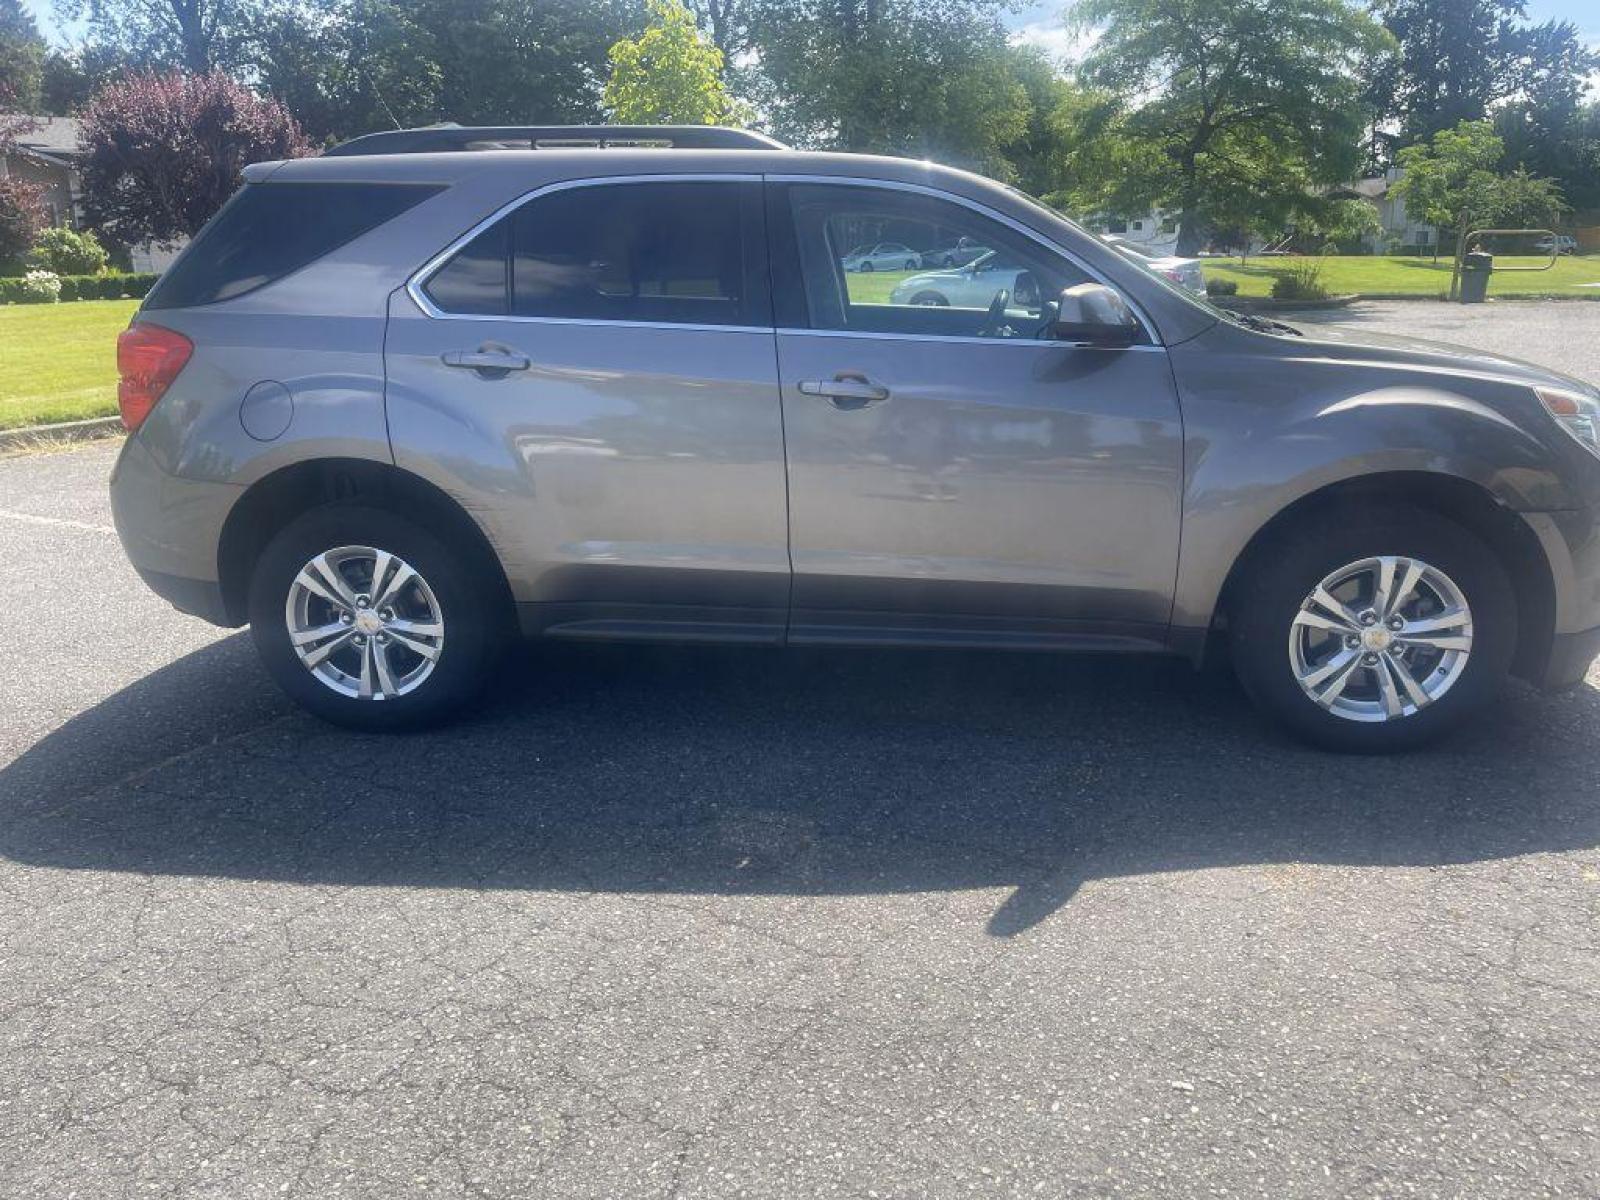 2012 GOLD /BLACK CHEVROLET EQUINOX LT SPRT UTILITY FLEX FUEL (2GNFLEEK2C6) with an 2.4L engine, Automatic transmission, located at 1505 S 356th St., Federal Way, WA, 98003, 47.282051, -122.314781 - Reduced price to $7,999!! Runs great! And will handle wonderful in the rain and PNW weather conditions during fall and winter! This Equinox is a great compact SUV with engaging handling and enough gusto for daily driving, but very good gas mileage with the Flex Fuel package. Very roomy five-sea - Photo #4